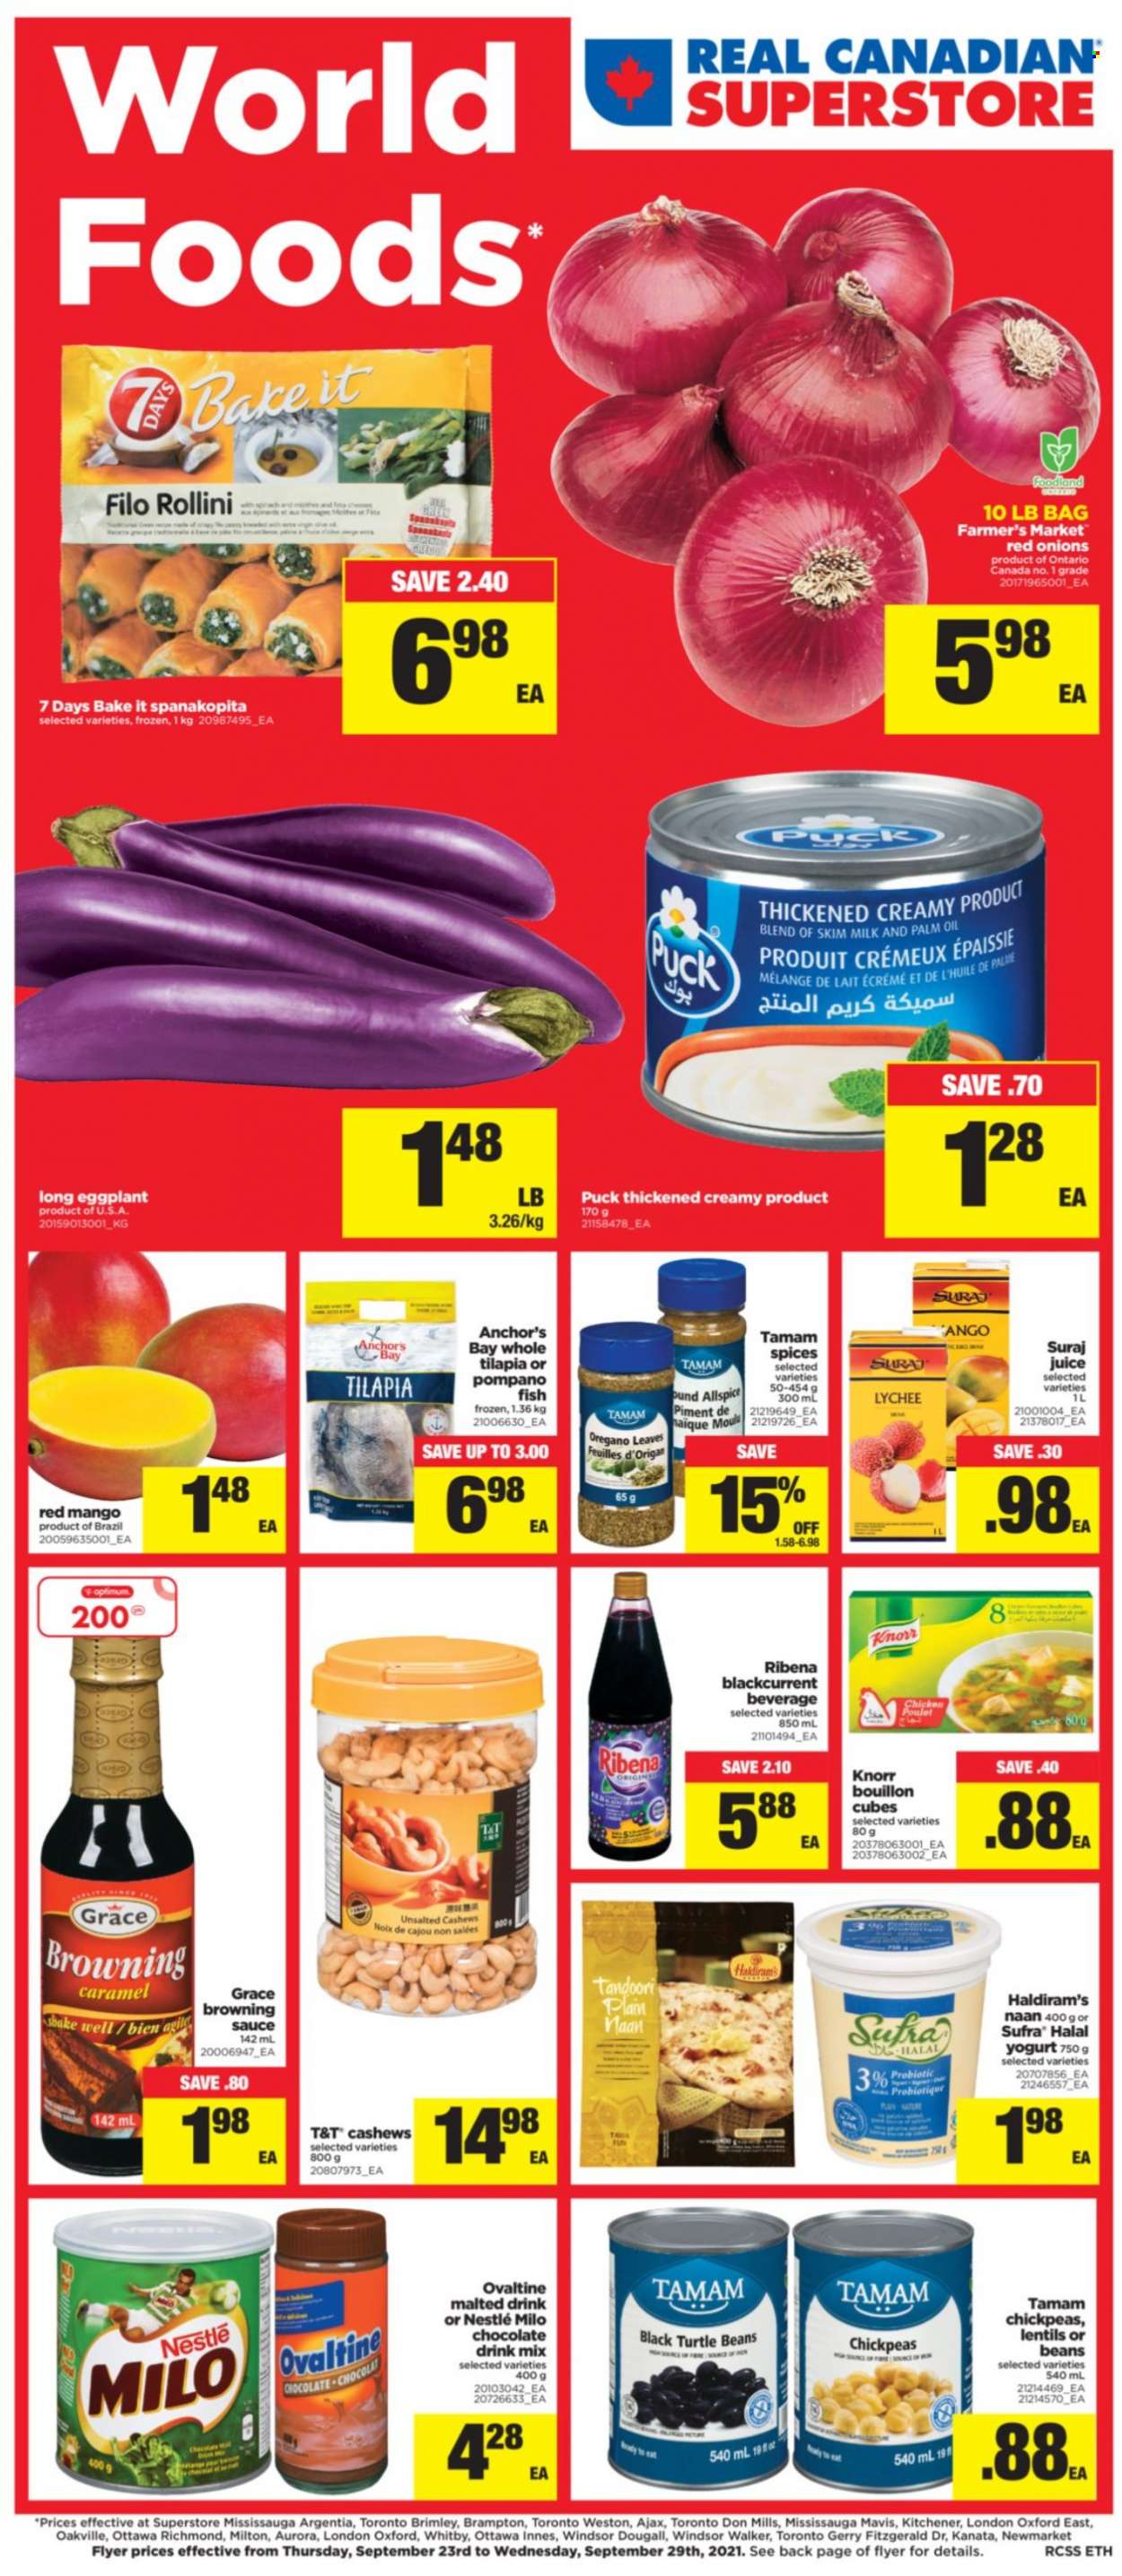 thumbnail - Real Canadian Superstore Flyer - September 23, 2021 - September 29, 2021 - Sales products - beans, red onions, onion, eggplant, lychee, mango, tilapia, pompano, fish, sauce, Puck, yoghurt, milk, Milo, Anchor, filo dough, chocolate, 7 Days, bouillon, lentils, chickpeas, caramel, palm oil, oil, cashews, juice, chocolate drink, Ajax, Knorr, Nestlé. Page 1.